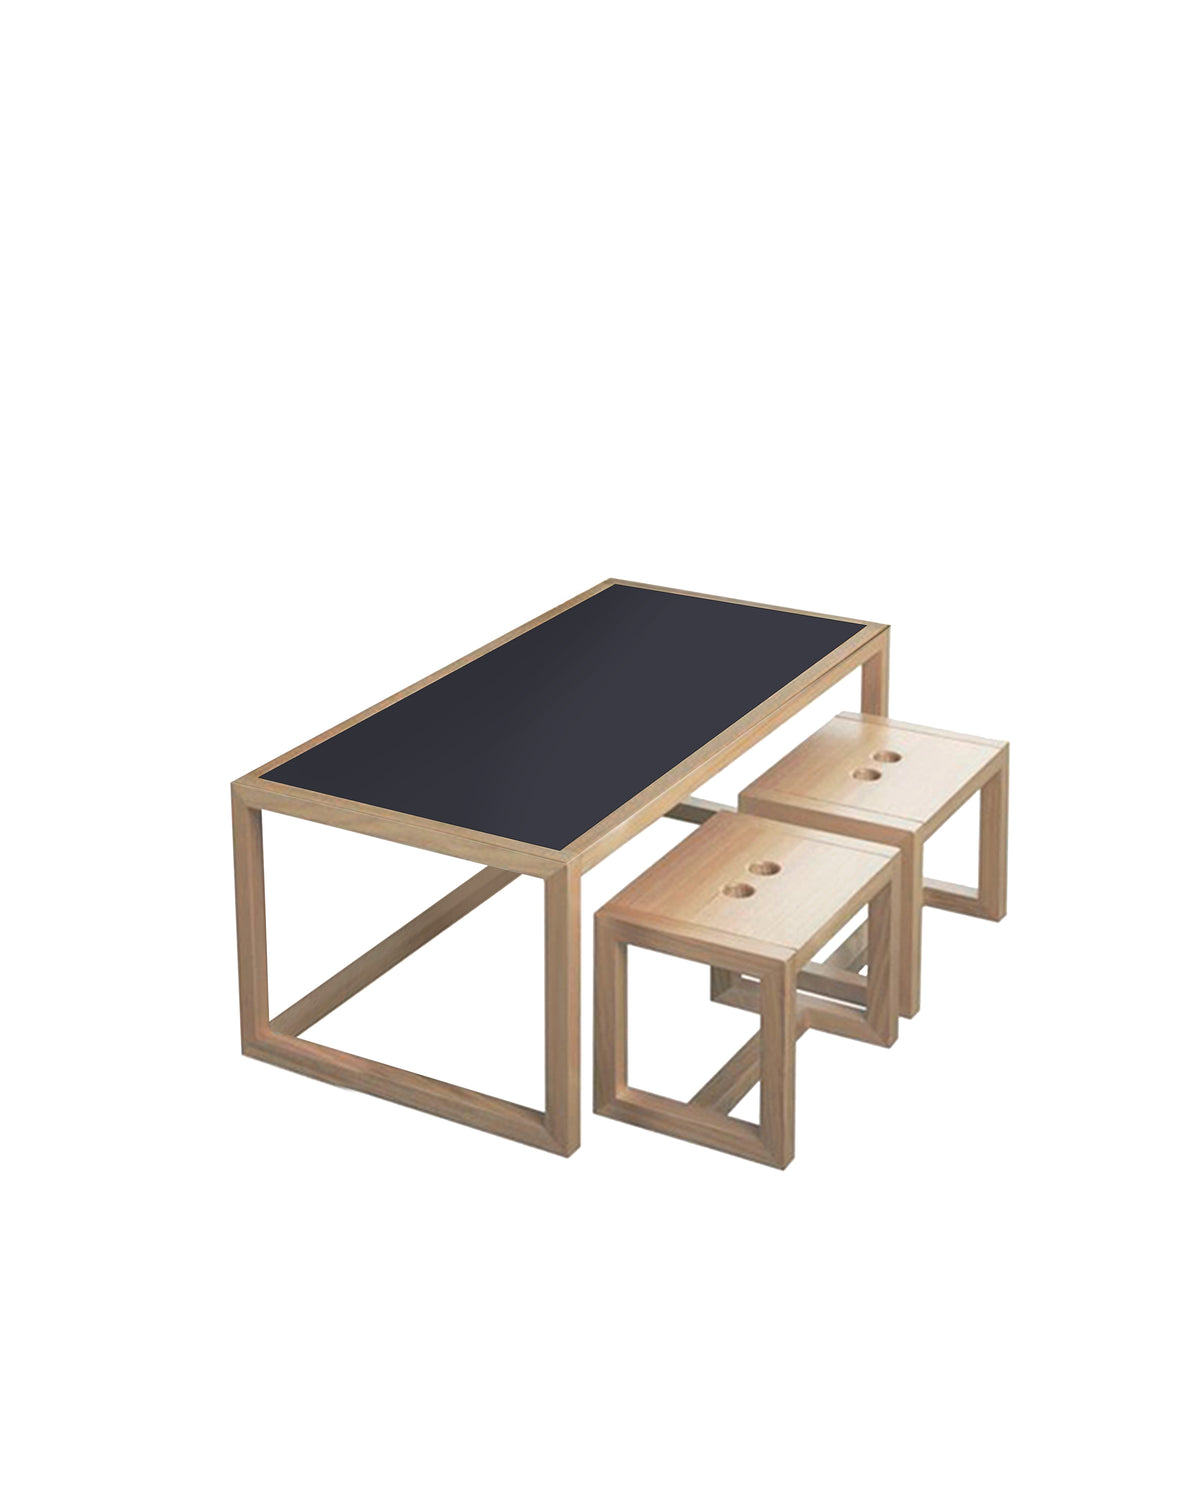 The Chalk Play Table is a versatile table and chair set for your kids to create, eat, sit, play and draw at. With a chalkboard table top for fun chalkie playtime actives, this kid's play table is versatile and encourages creativity and learning. Available in 2 sizes.